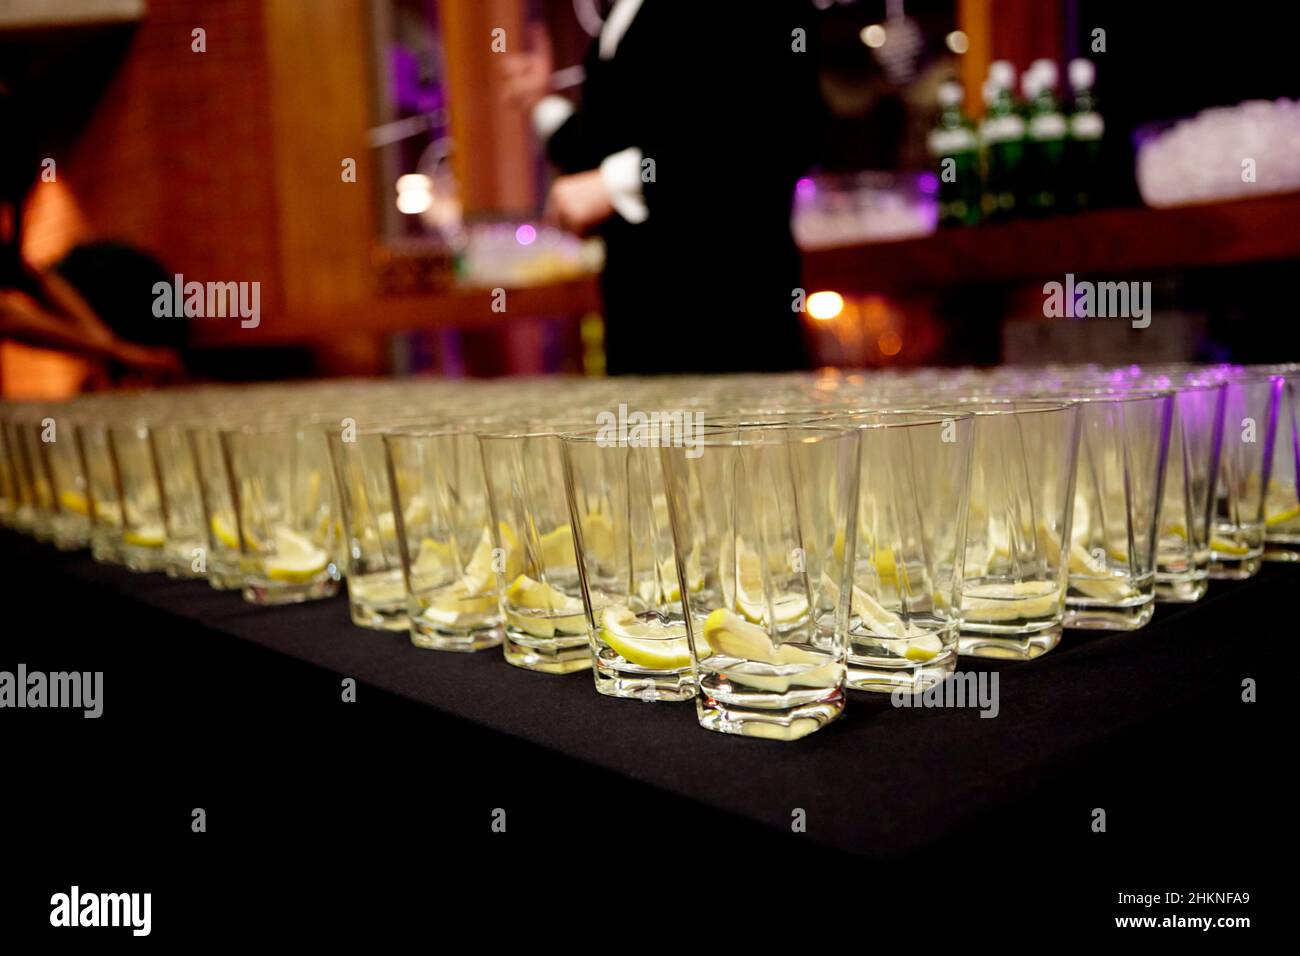 gin and tonic glasses set out prepared to be filled at a corporate event Stock Photo